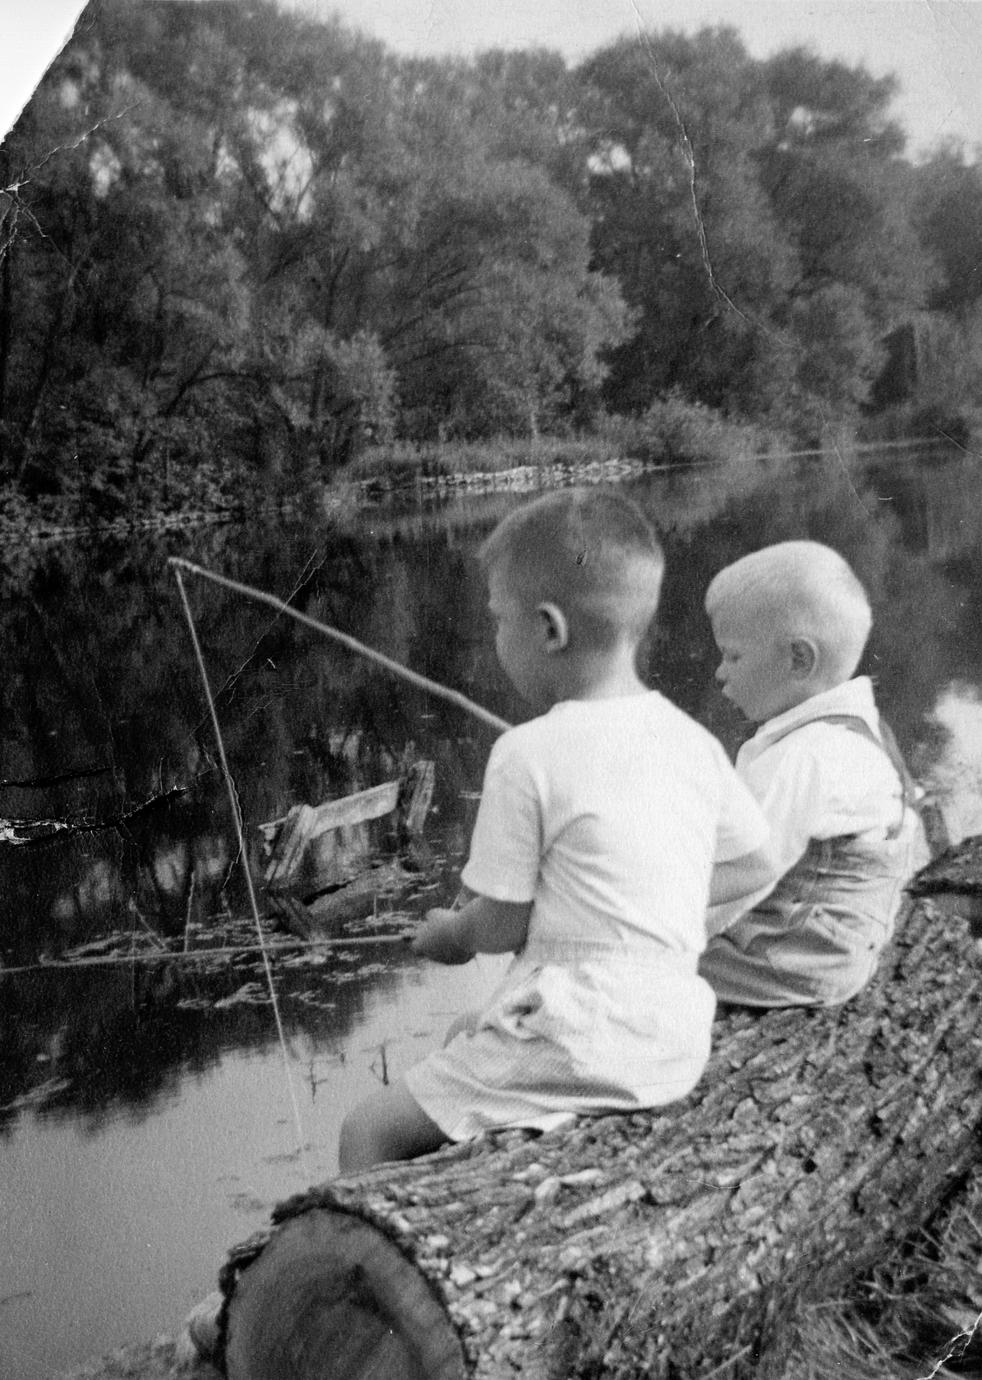 Fishing on the Fox River. Rochester, Wisconsin - UWDC - UW-Madison Libraries